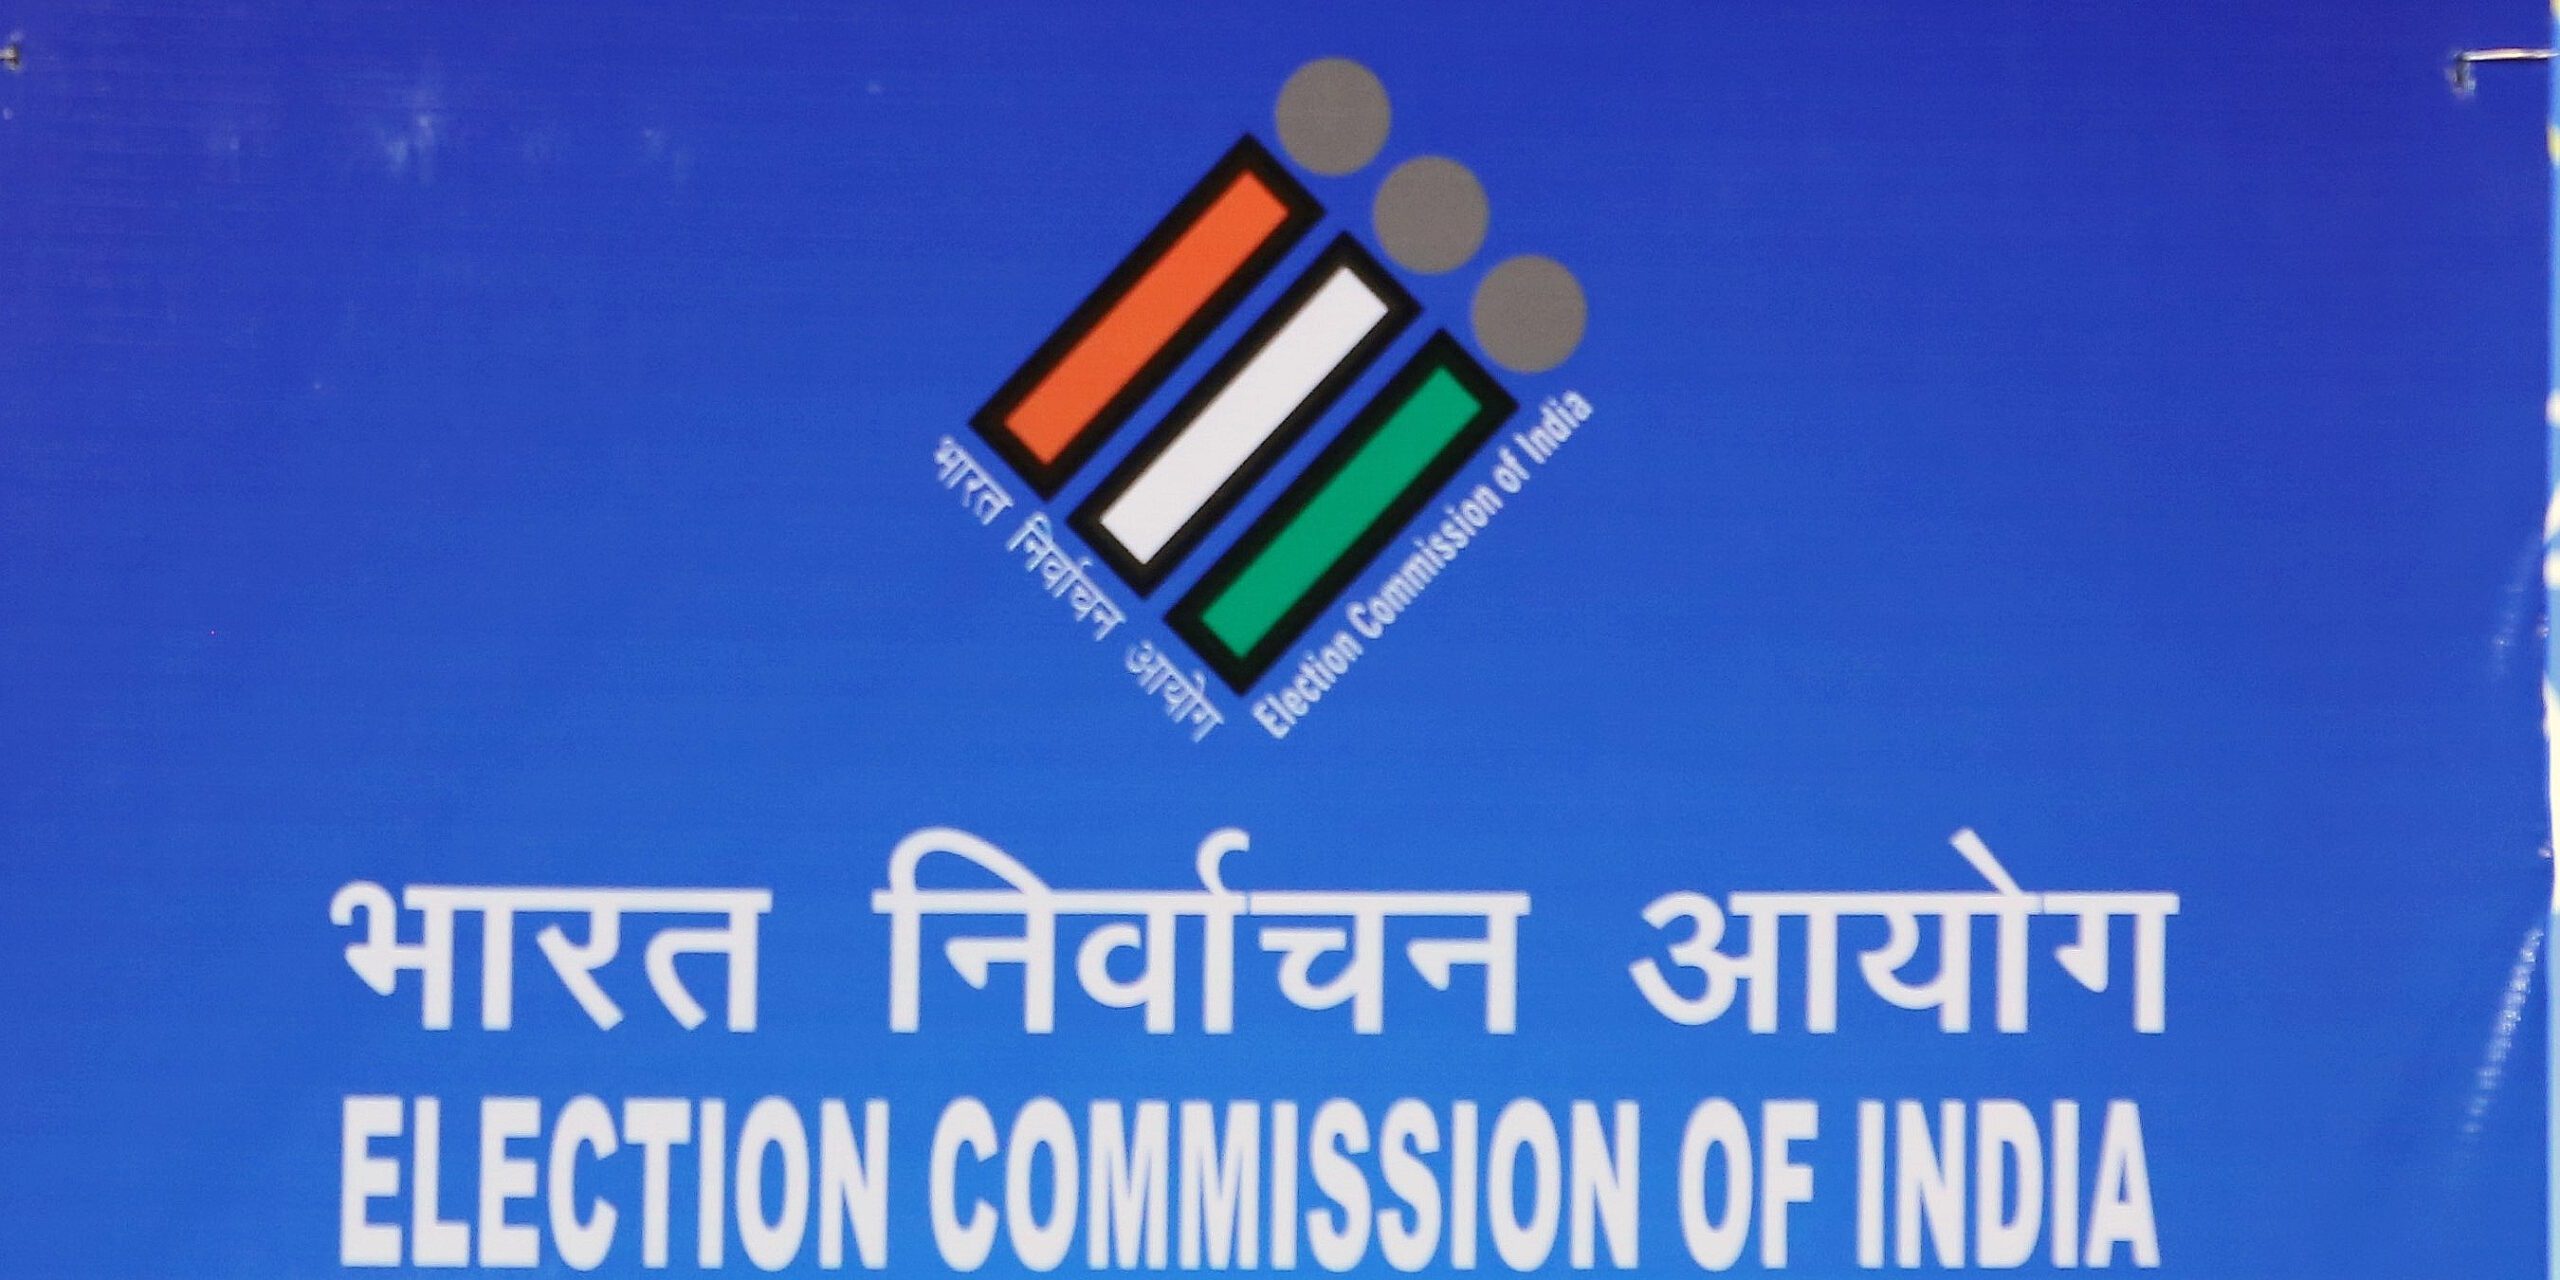 Election Commission of India (ECI) (Wikimedia Commons)